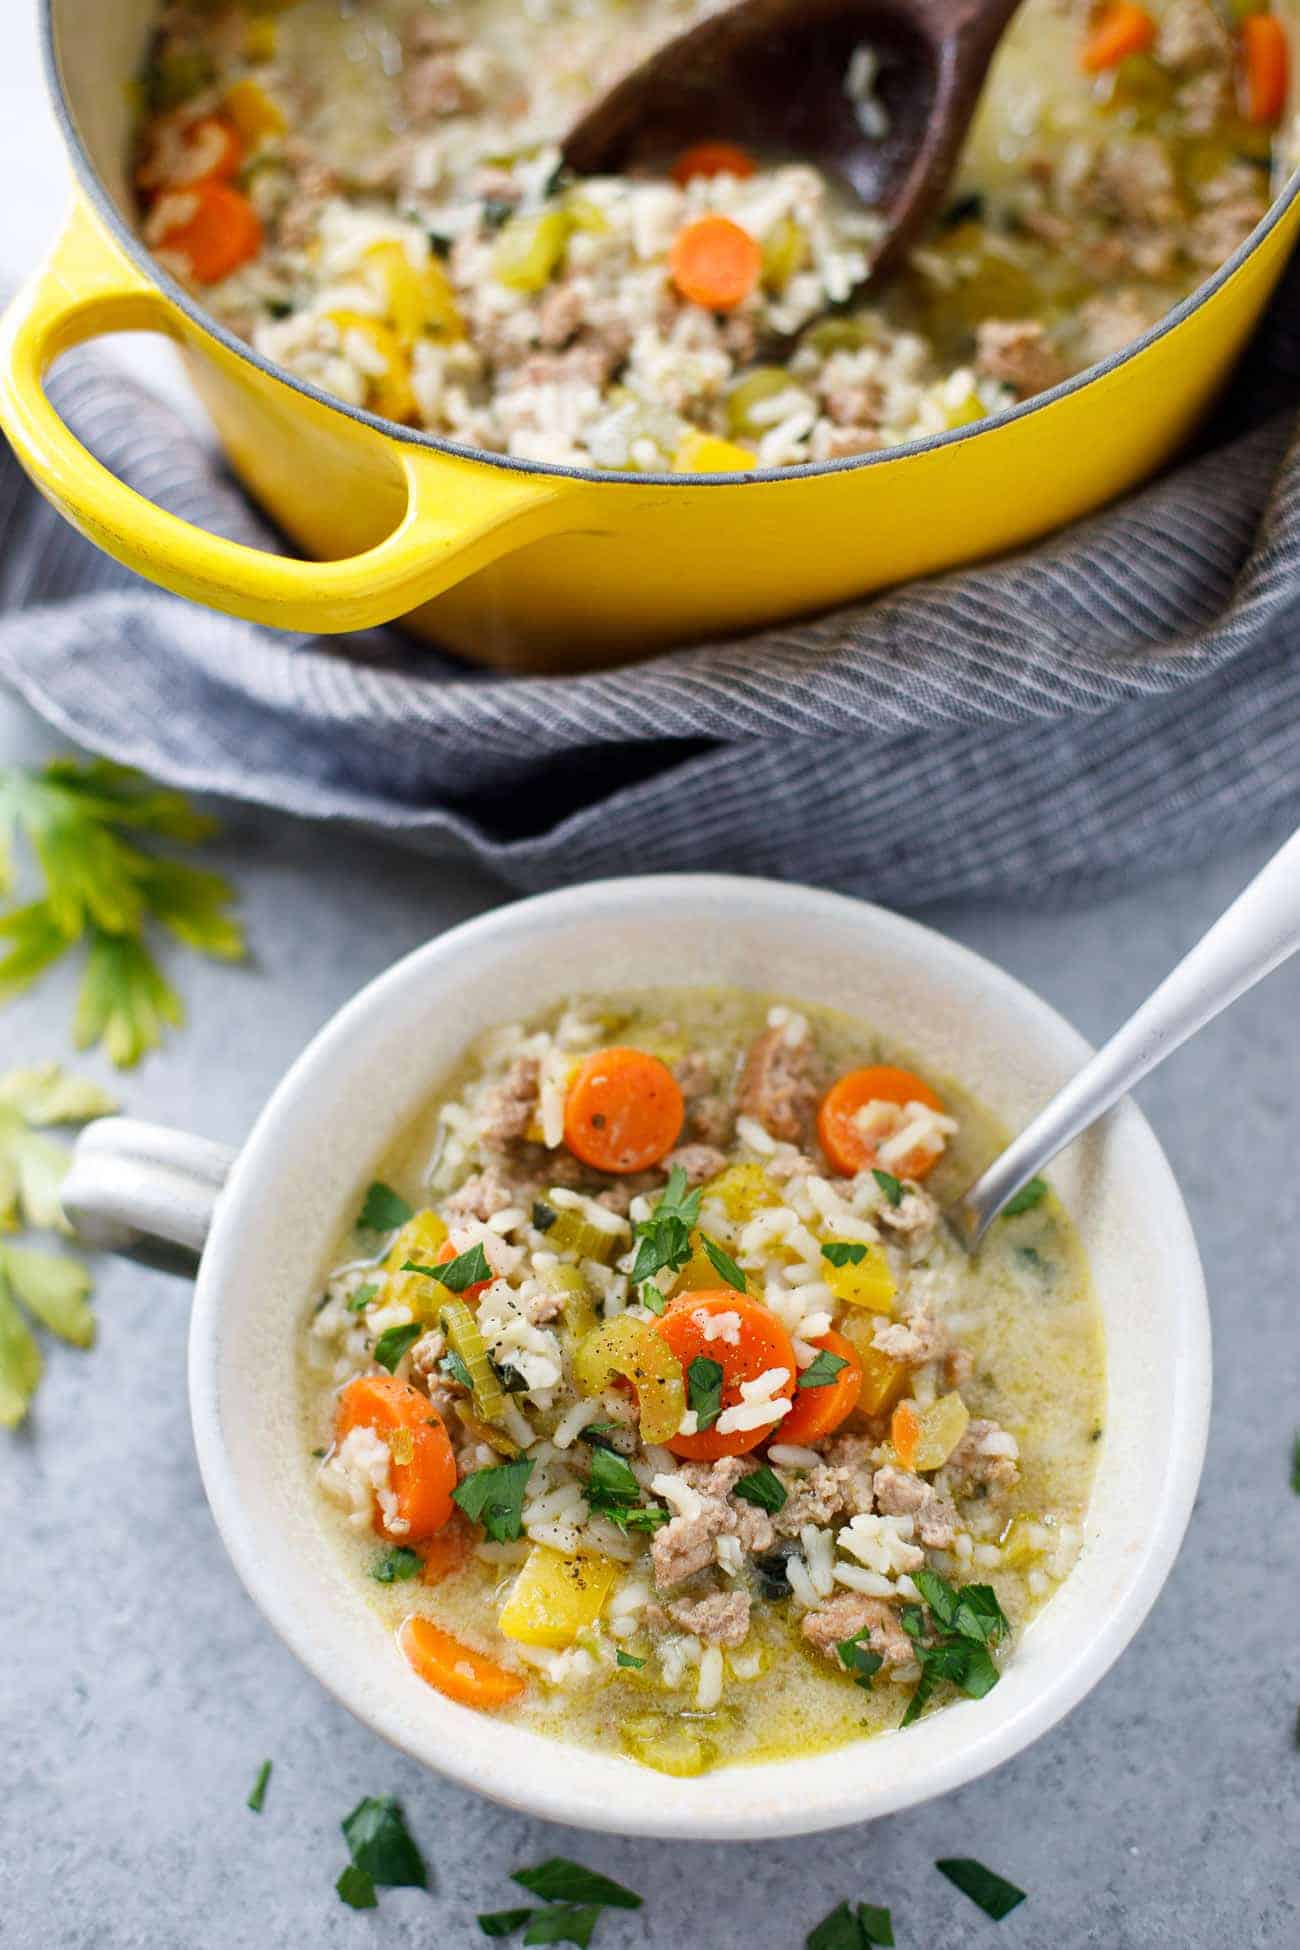 Ground Turkey and Rice Soup